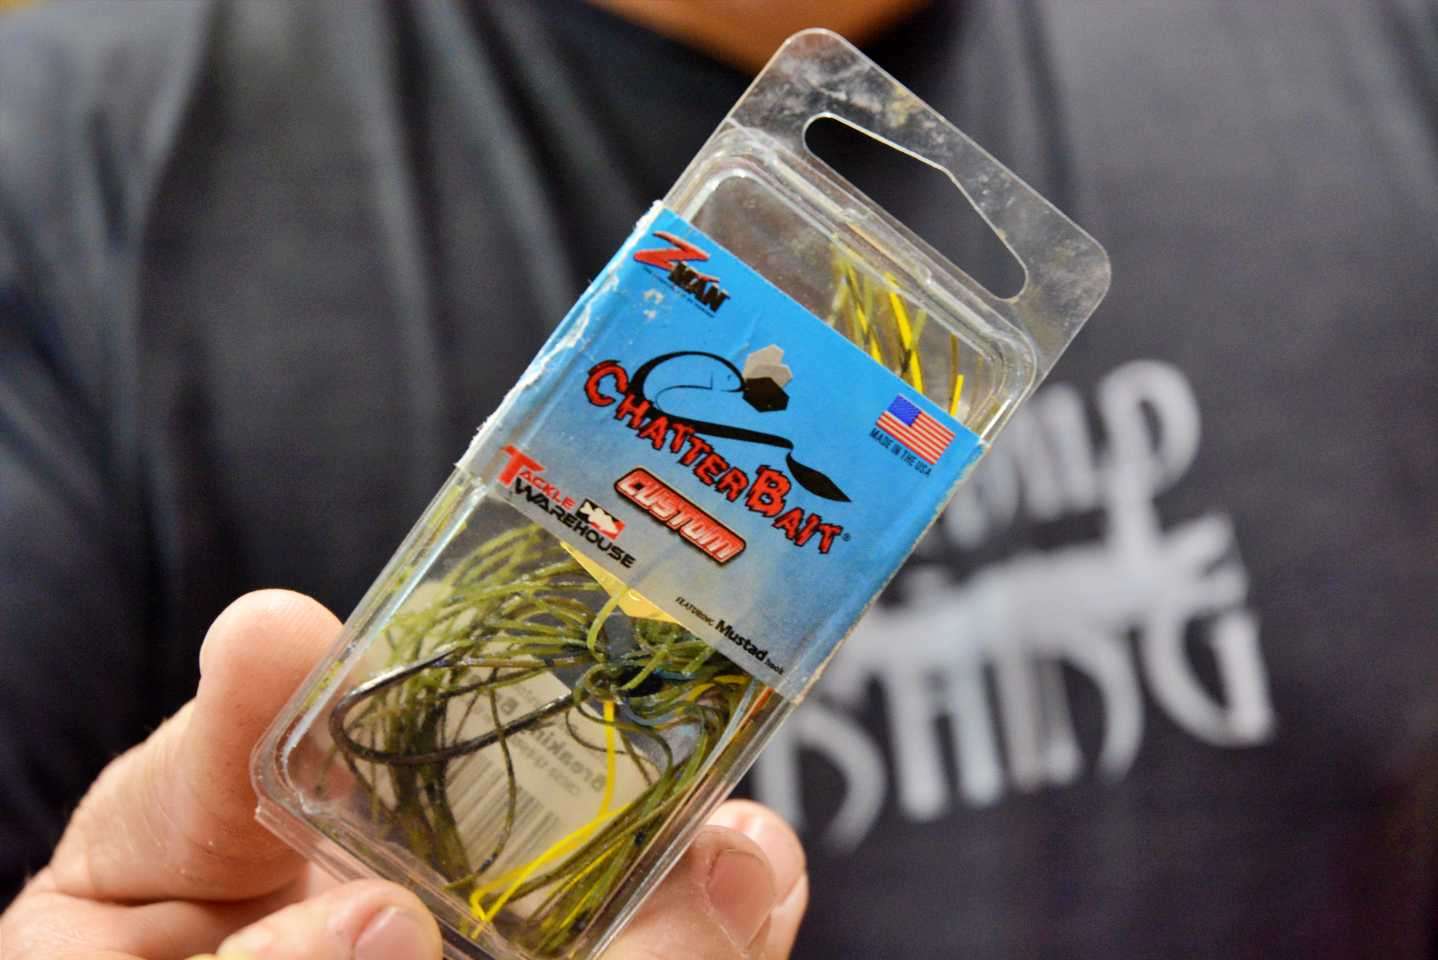 The choice is a Z-Man ChatterBait.  